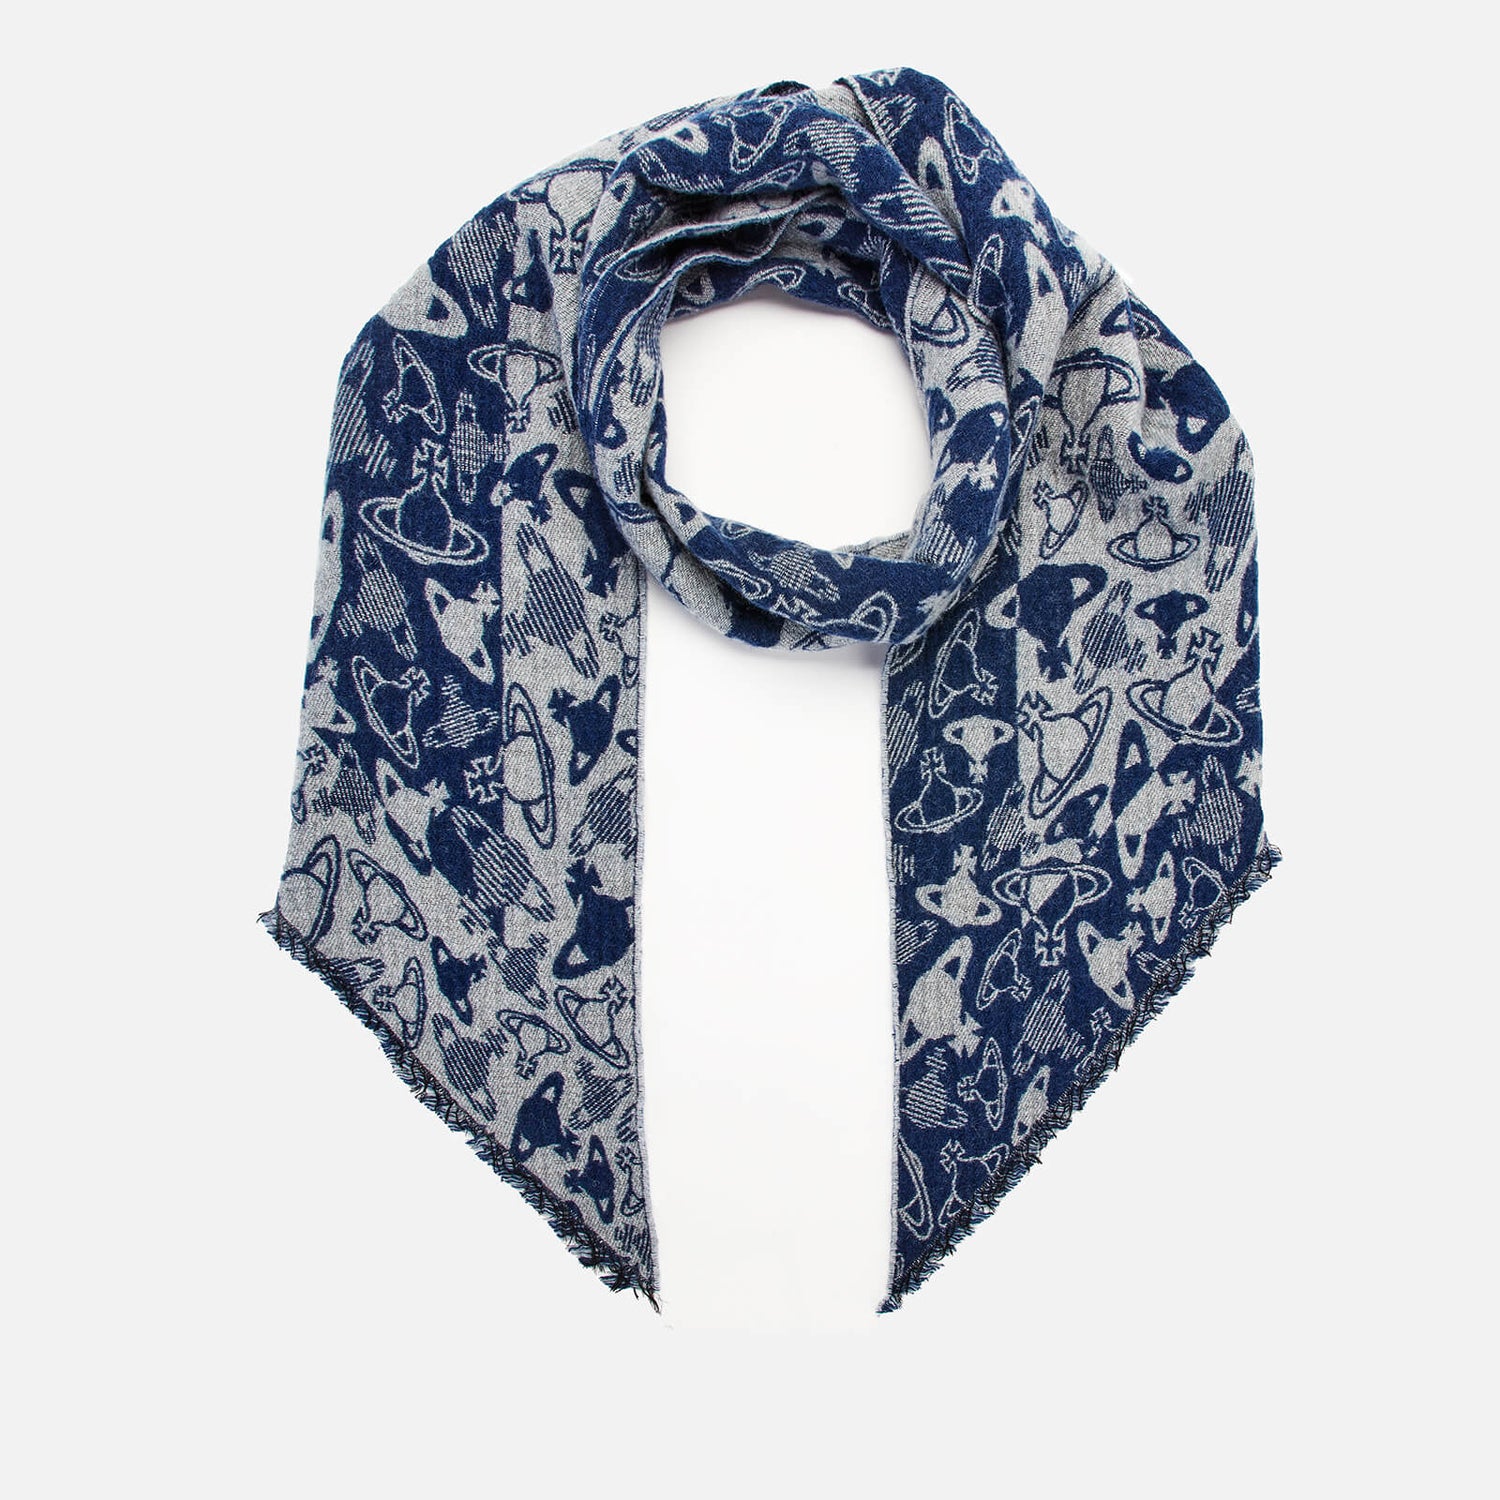 Vivienne Westwood Women's Two Point Silhouette Orb Scarf - Night Blue